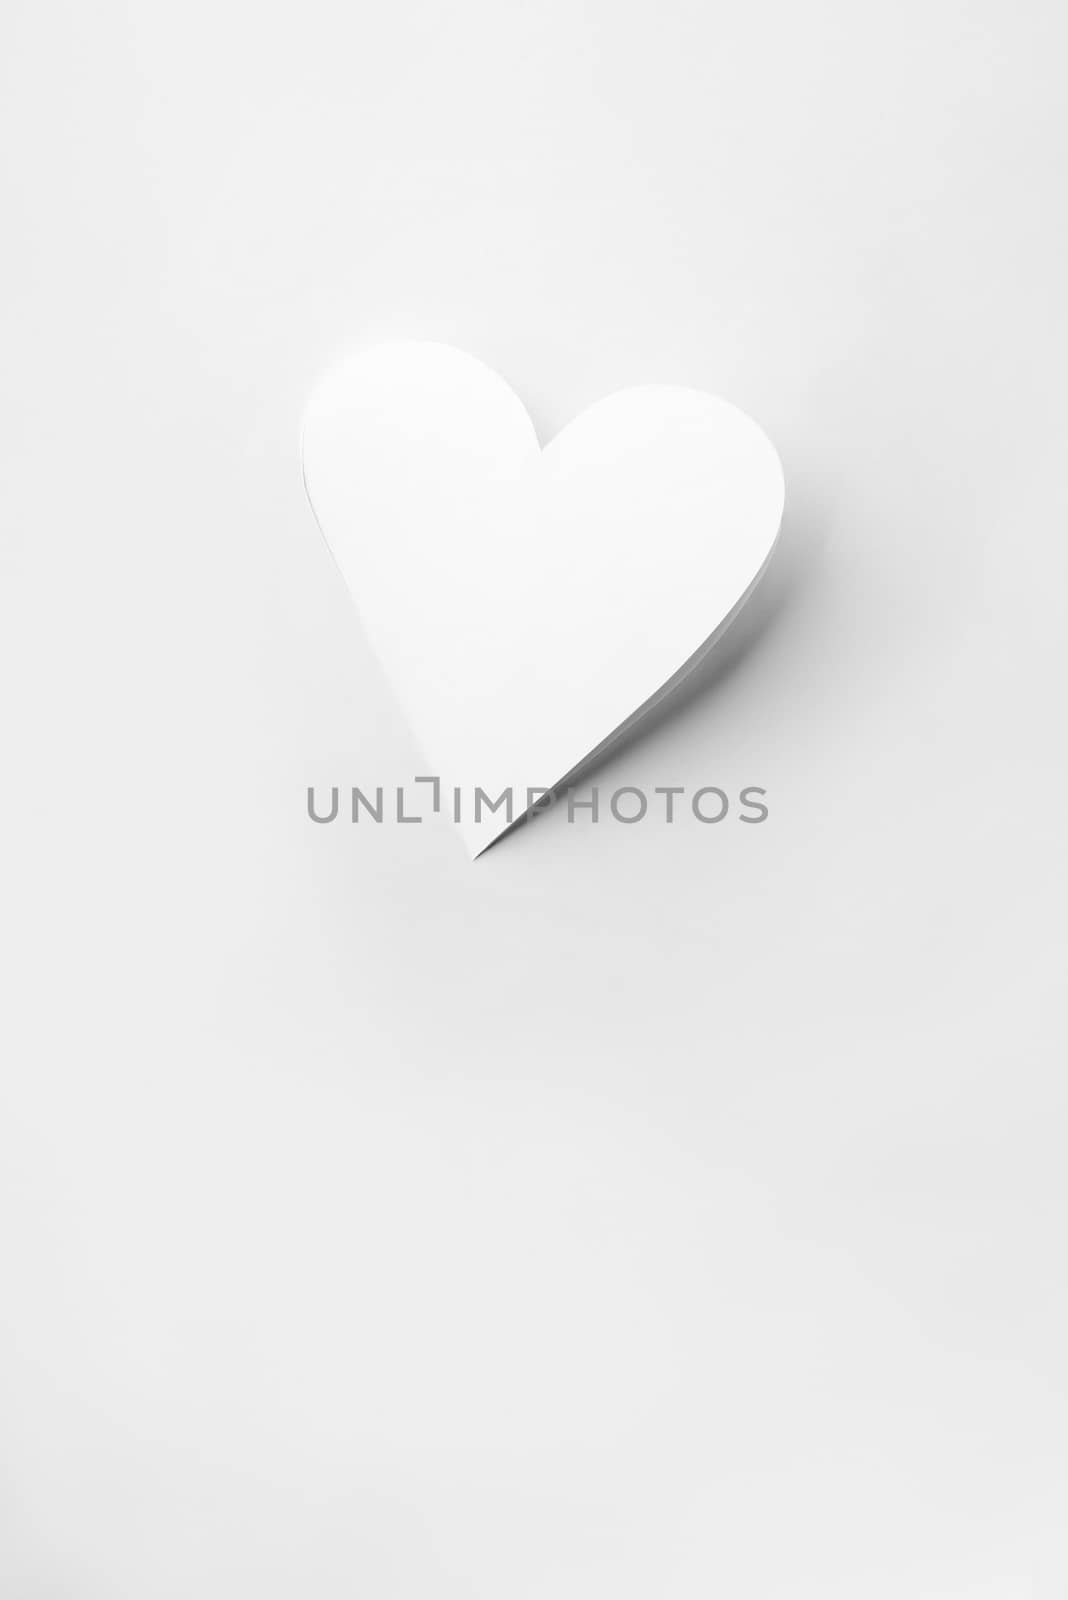 Real cutout white paper heart with shadow